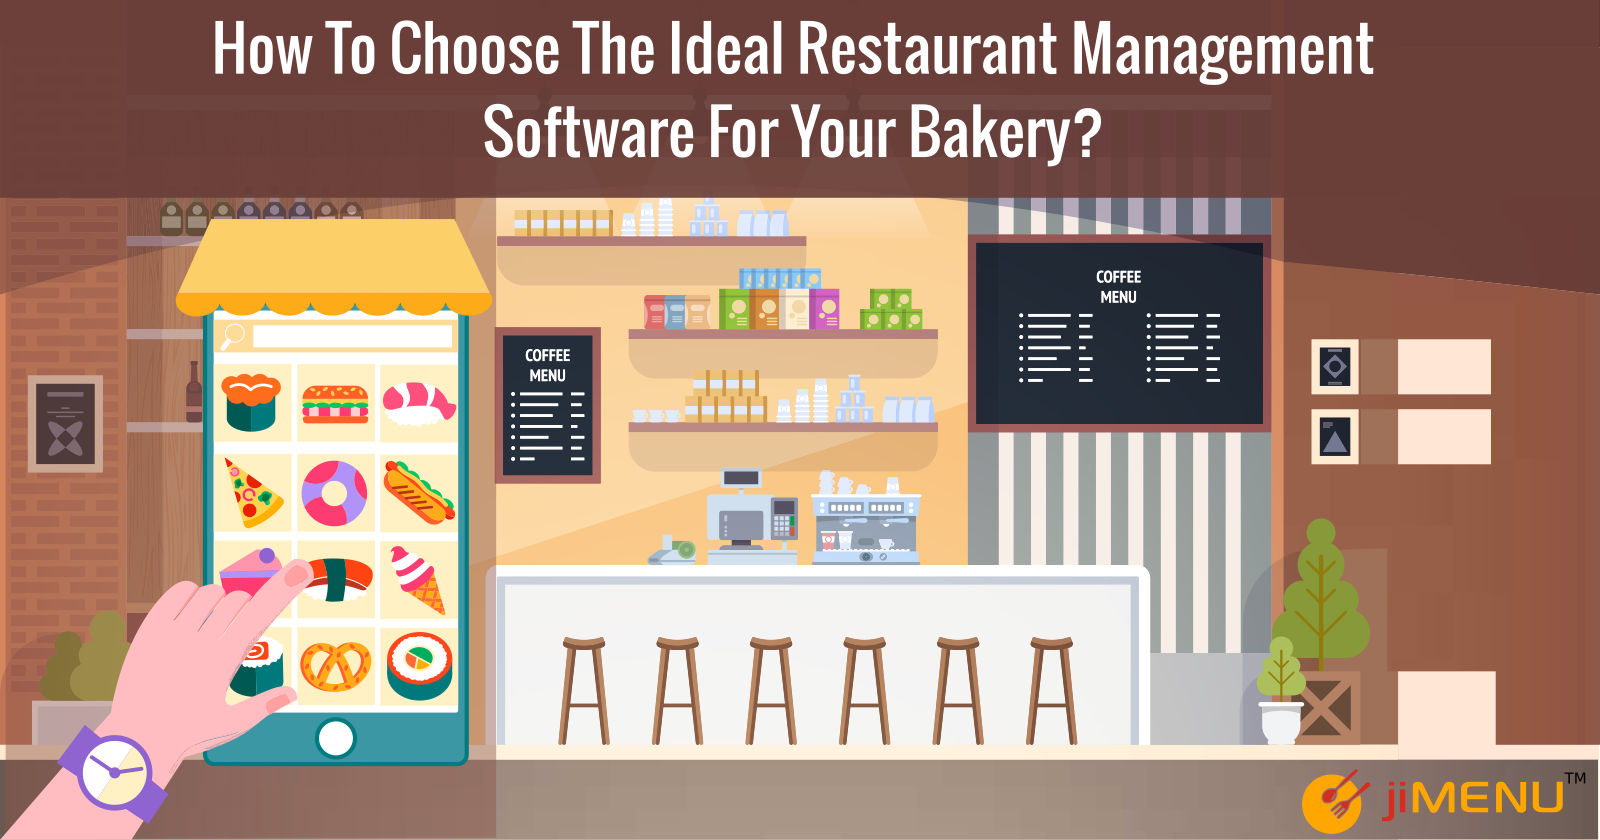 How To Choose The Ideal Restaurant Management Software For Your Bakery?